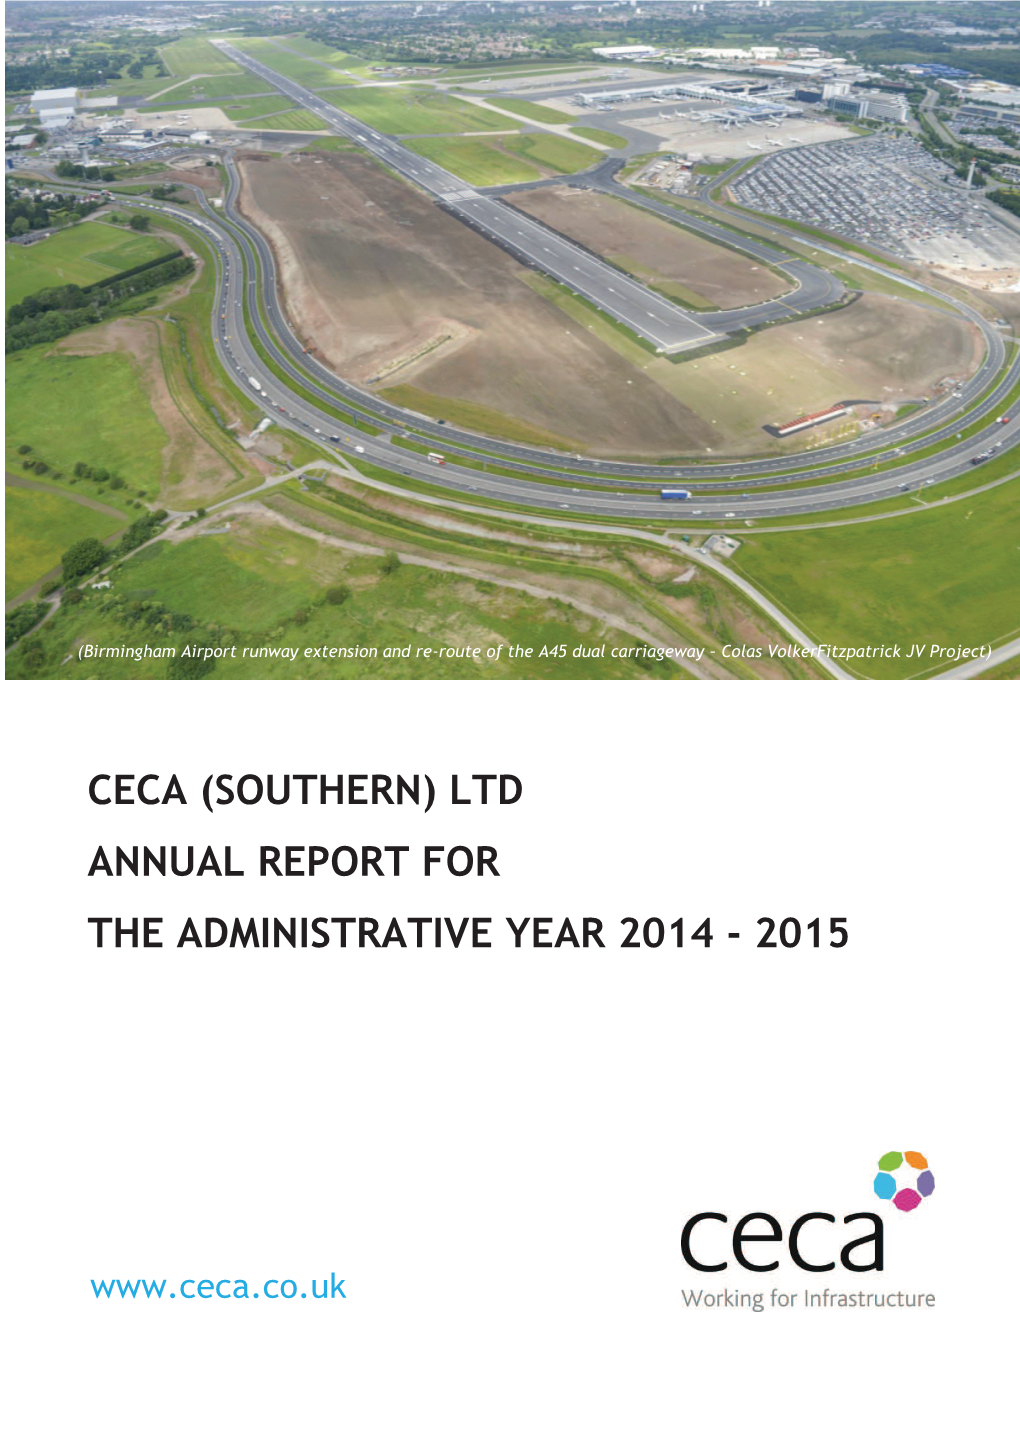 Ceca (Southern) Ltd Annual Report for the Administrative Year 2014 - 2015